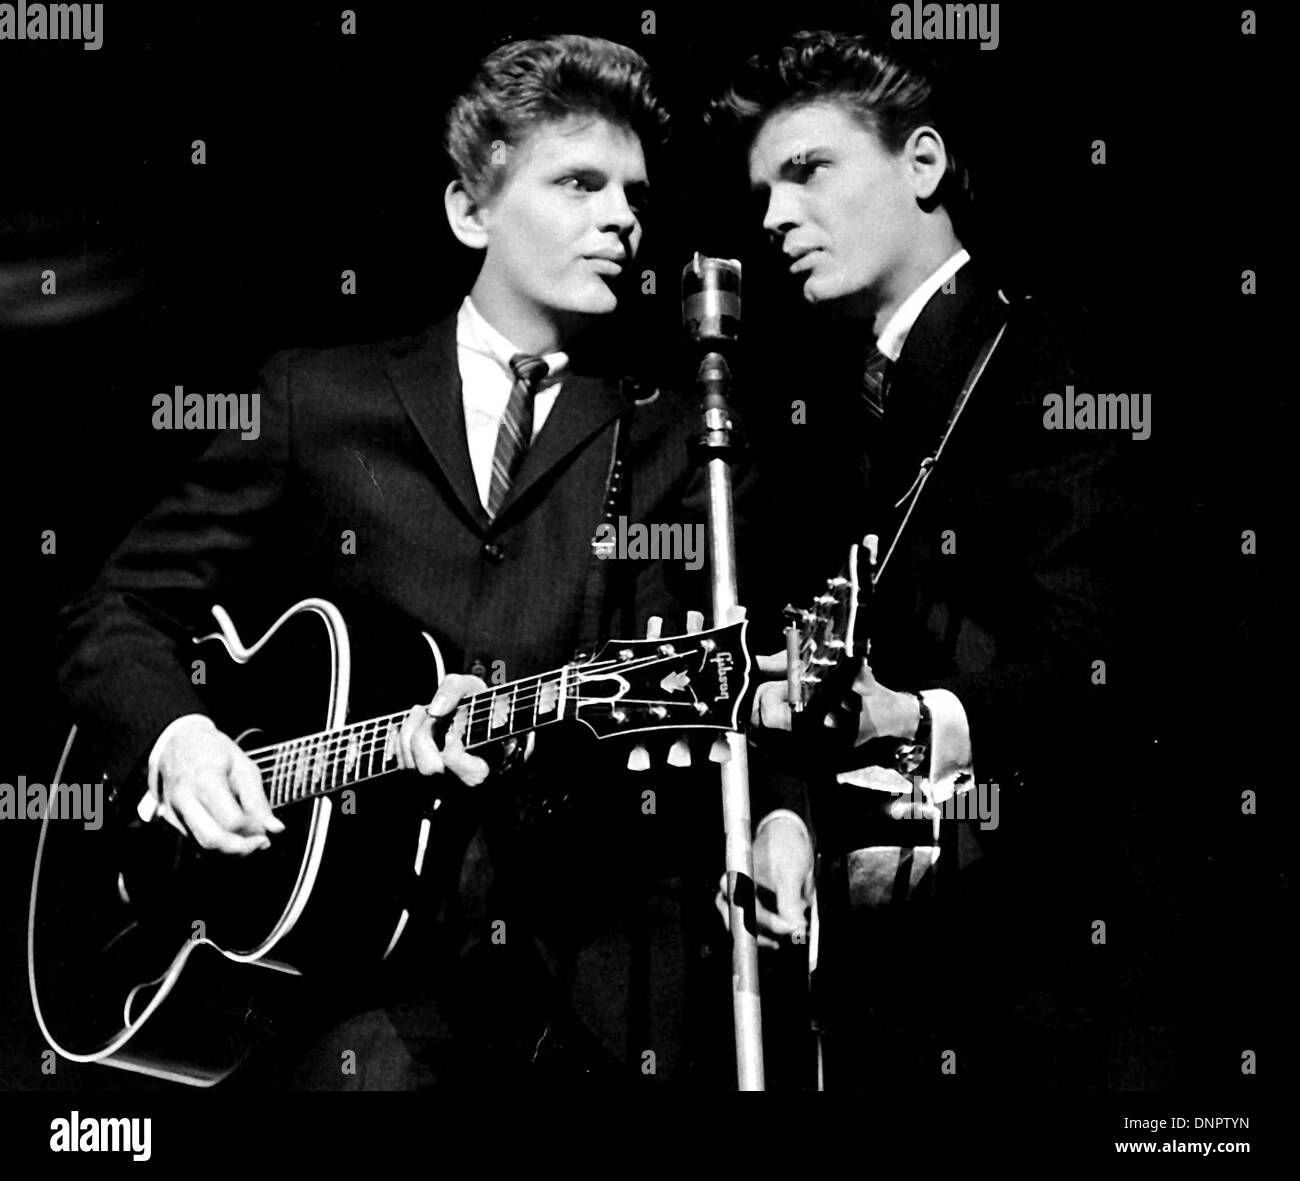 Burbank, California, USA. 3rd Jan, 2014. Phil Everly, who with his brother Don, made up the musical duo The Everly Brothers, died Friday from chronic obstructive pulmonary disease. He was 74 years old. PICTURED: Date unknown - PHIL and DON EVERLY, the Everly Brothers. Credit:  Globe Photos/ZUMAPRESS.com/Alamy Live News Stock Photo